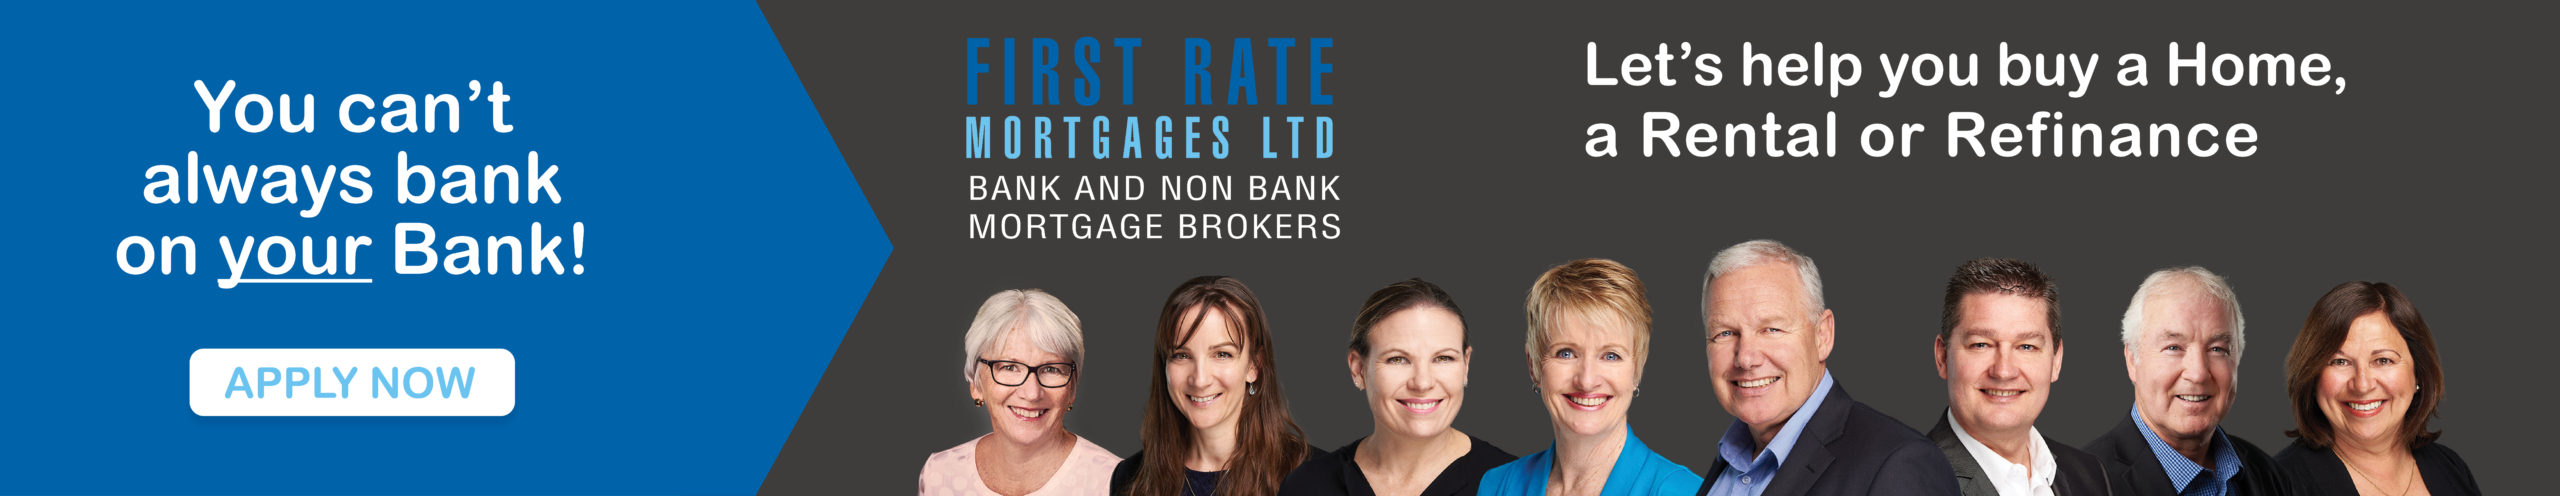 First Rate Mortgages